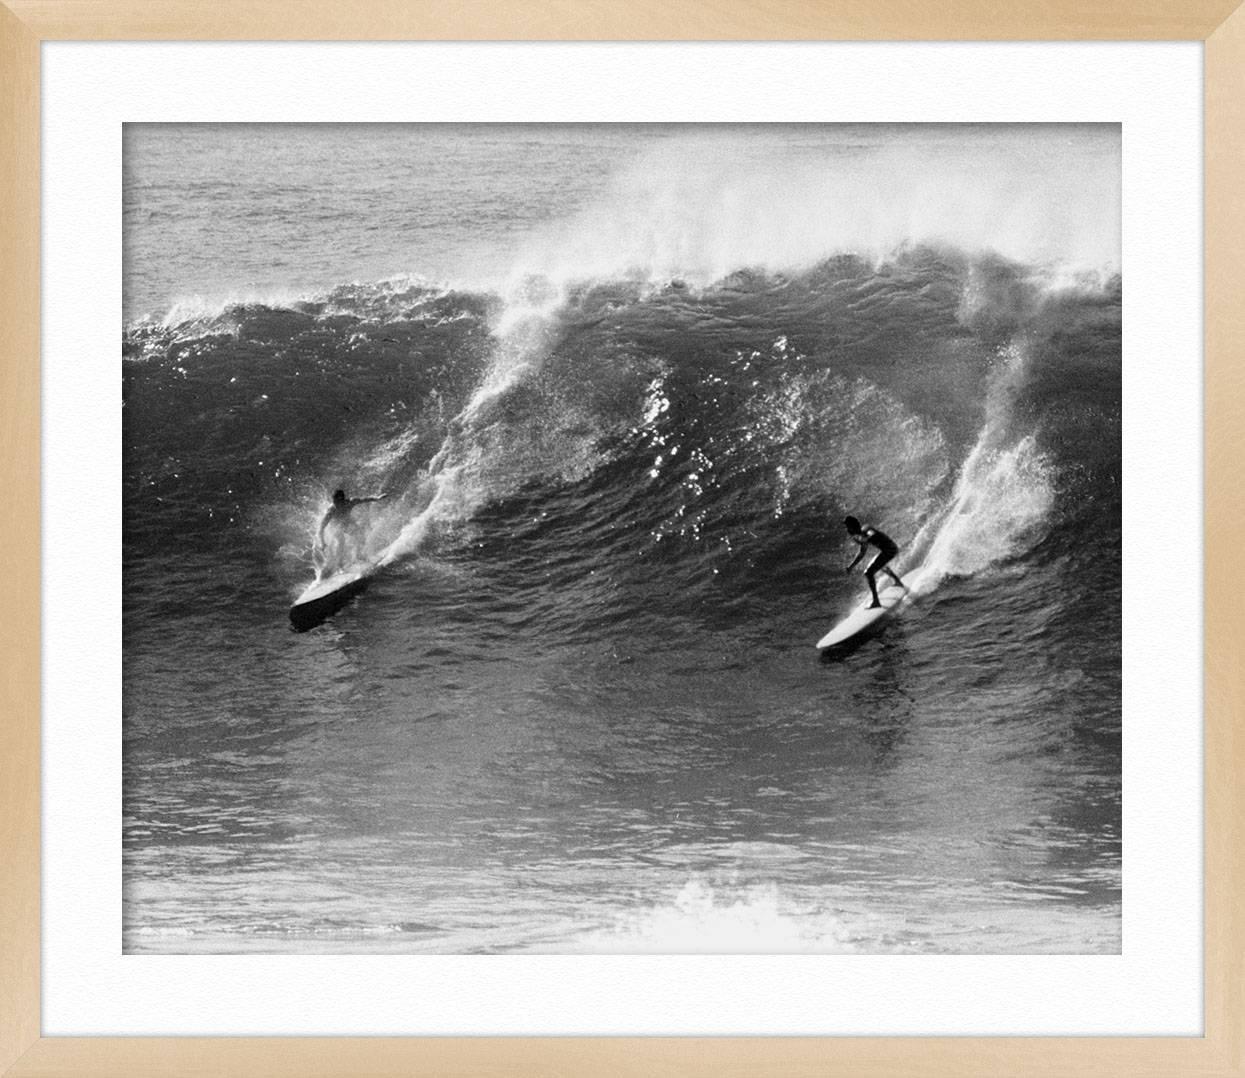 ABOUT THIS PIECE: This vintage surf photograph by Grant Rohloff was taken in Waimea Bay, Hawaii. Please note that these are exclusive archival photographs from the Rohloff estate as reflected in the prices. Grant Rohloff was a legendary photographer